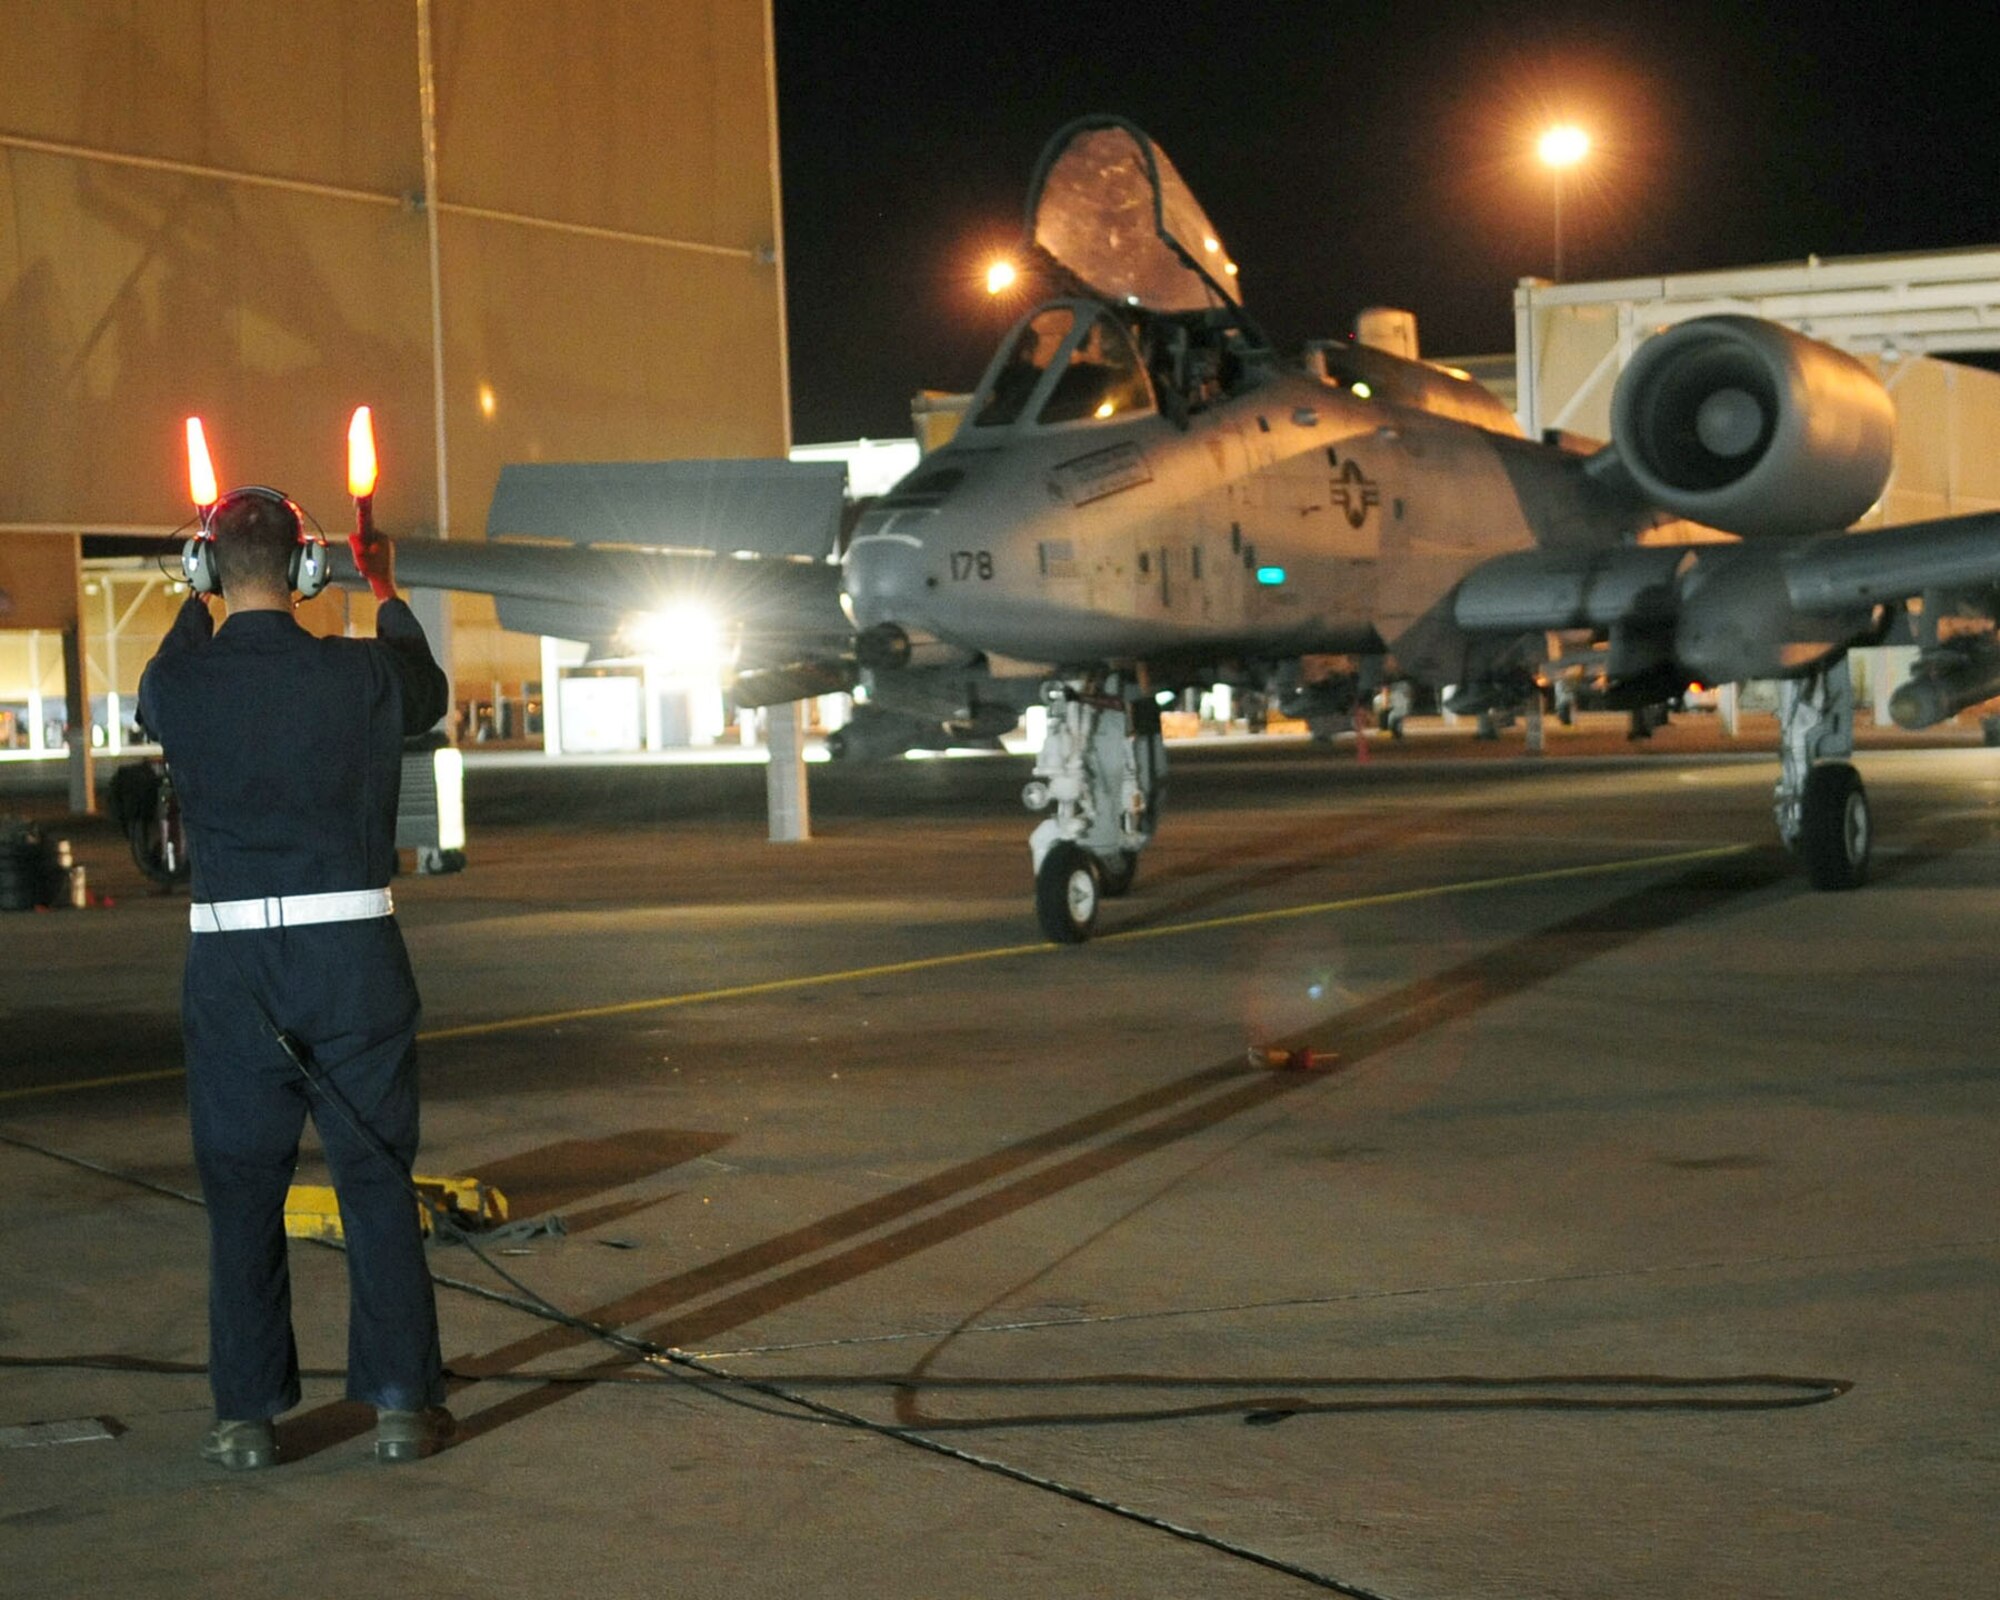 Airman 1st Class Jeff Gronemyer, an A-10C Thunderbolt II crew chief from the 355th Aircraft Maintenance Squadron at Davis-Monthan Air Force Base, Ariz., directs 1st Lt. Dan Griffin to his parking spot June 23, 2010, following his second night flight. Lieutenant Griffin is a student in the A-10C Pilot Initial Qualification course. . Upon completion of the course in August he will become a fully qualified A-10C attack pilot. (U.S. Air Force photo/Airman 1st Class Jerilyn Quintanilla)